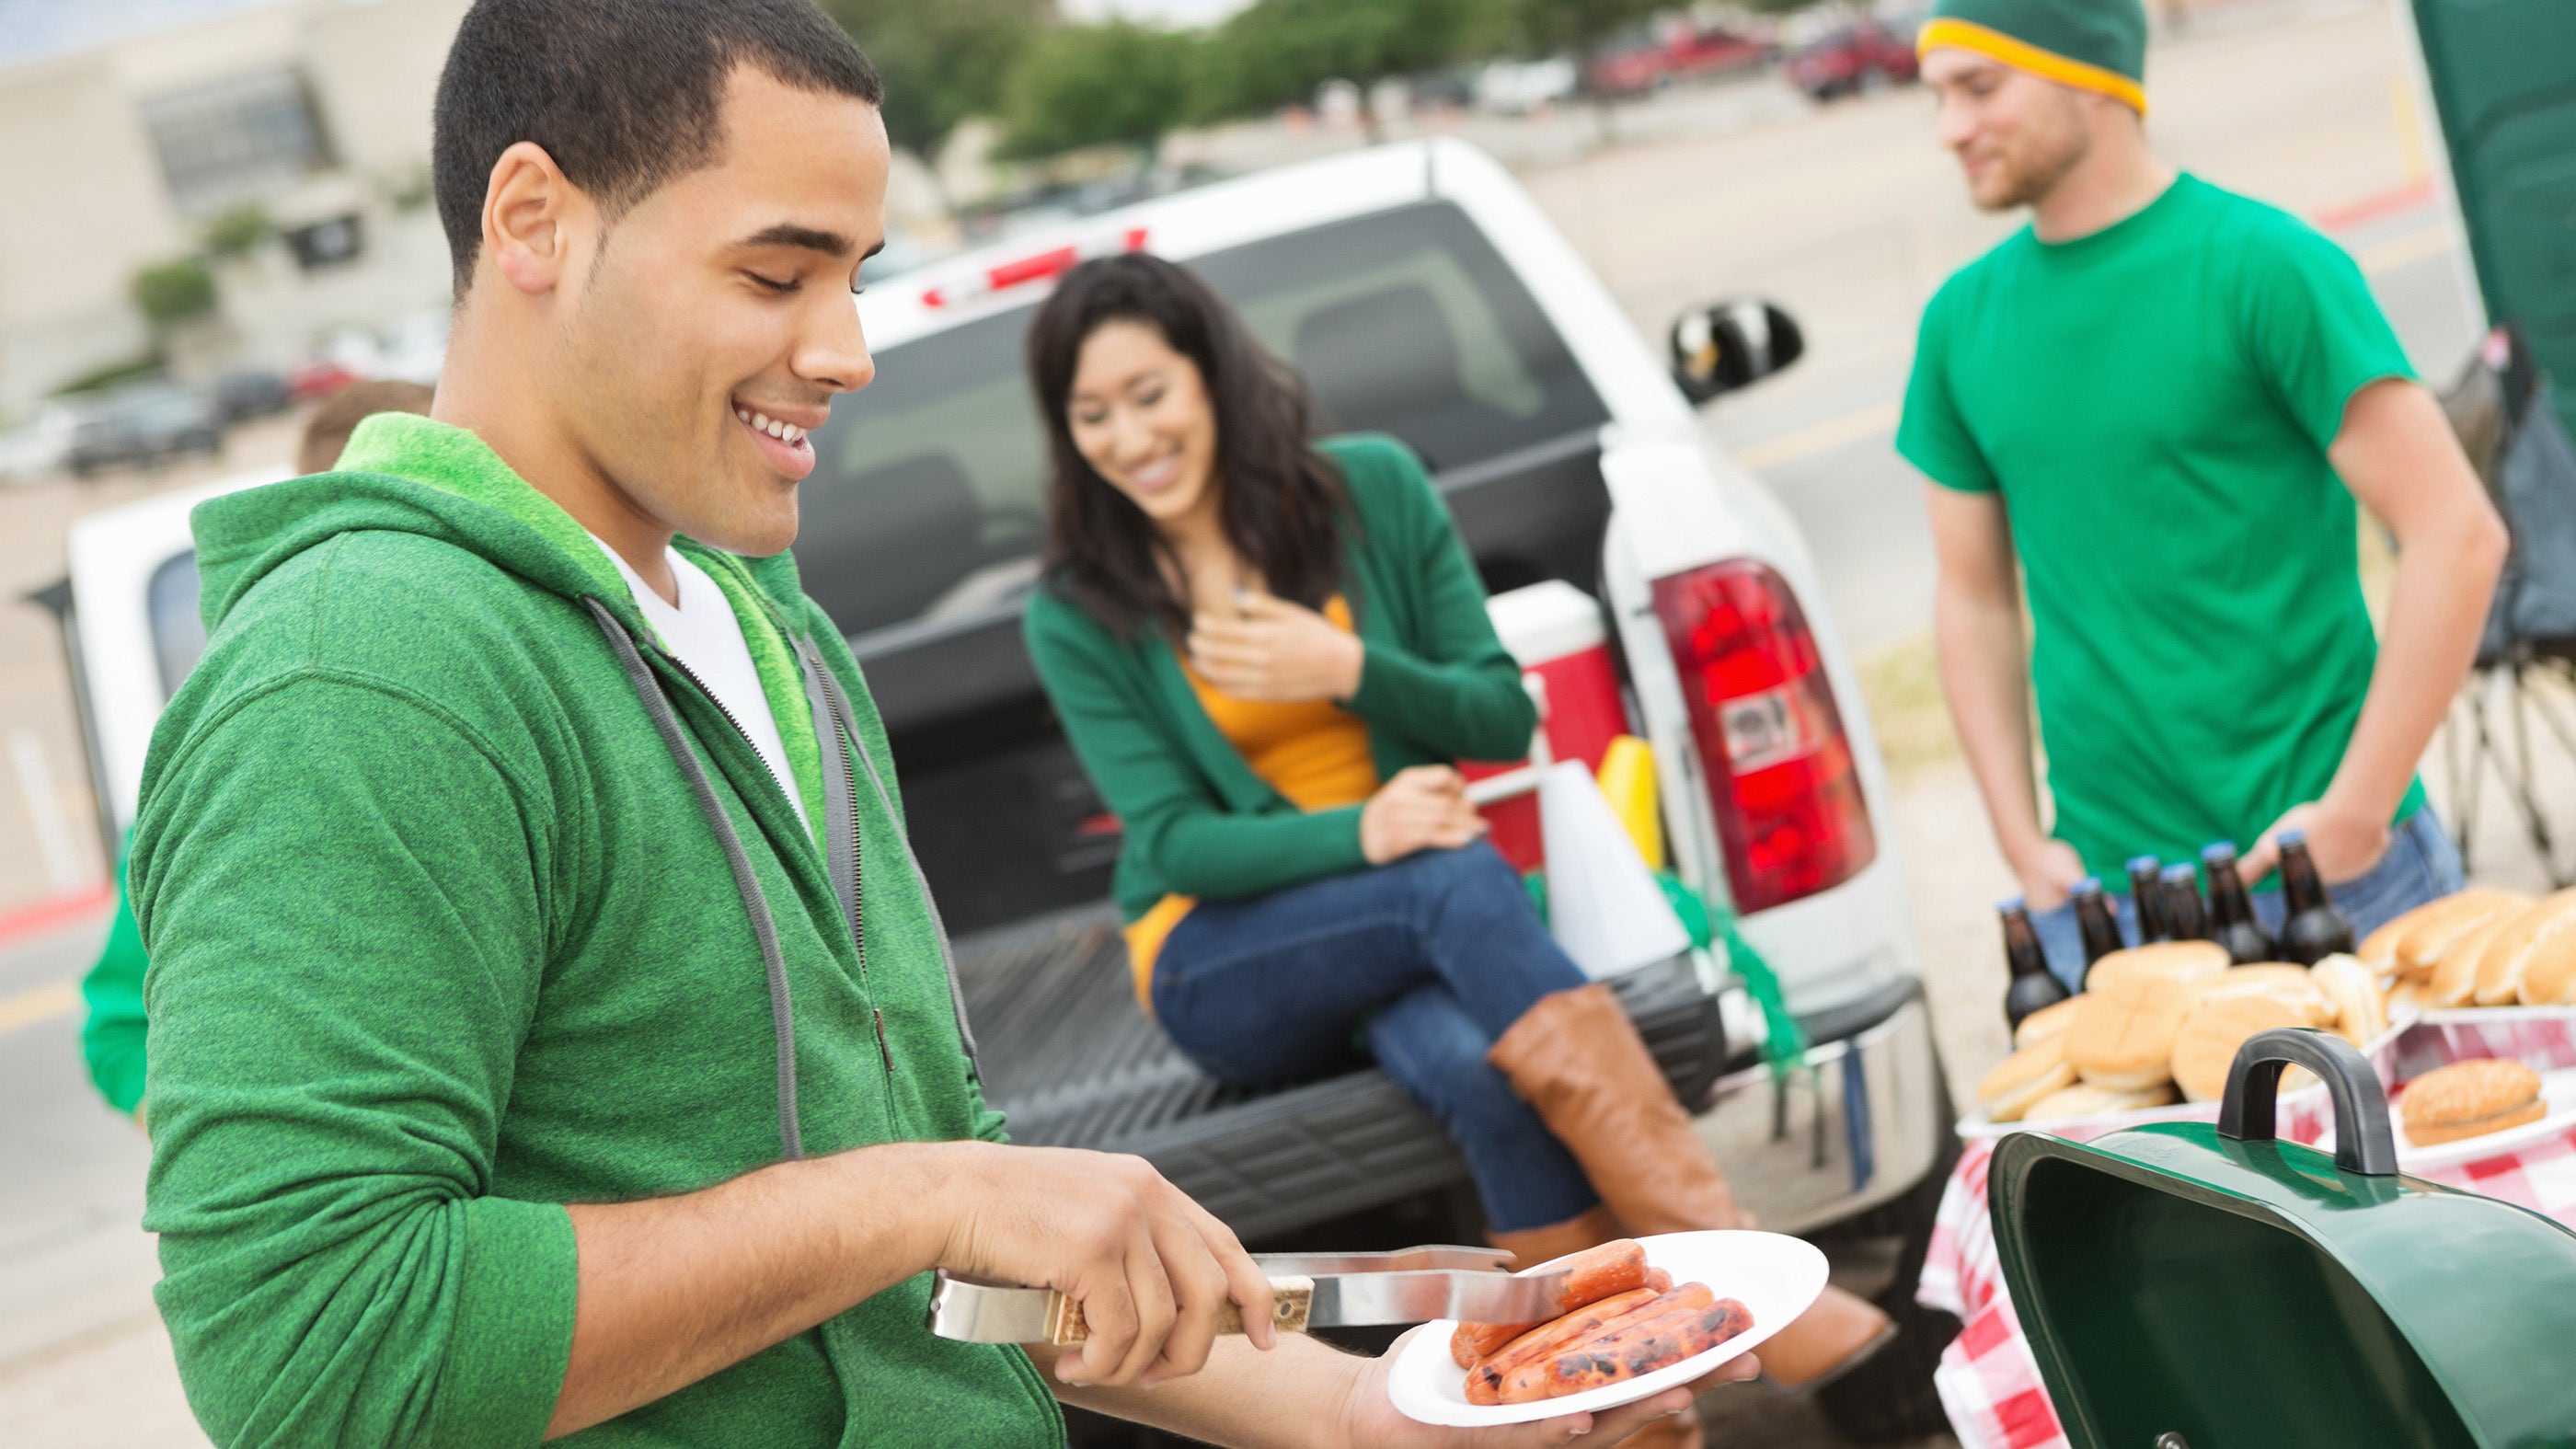 10 tailgating items for your Super Bowl Sunday